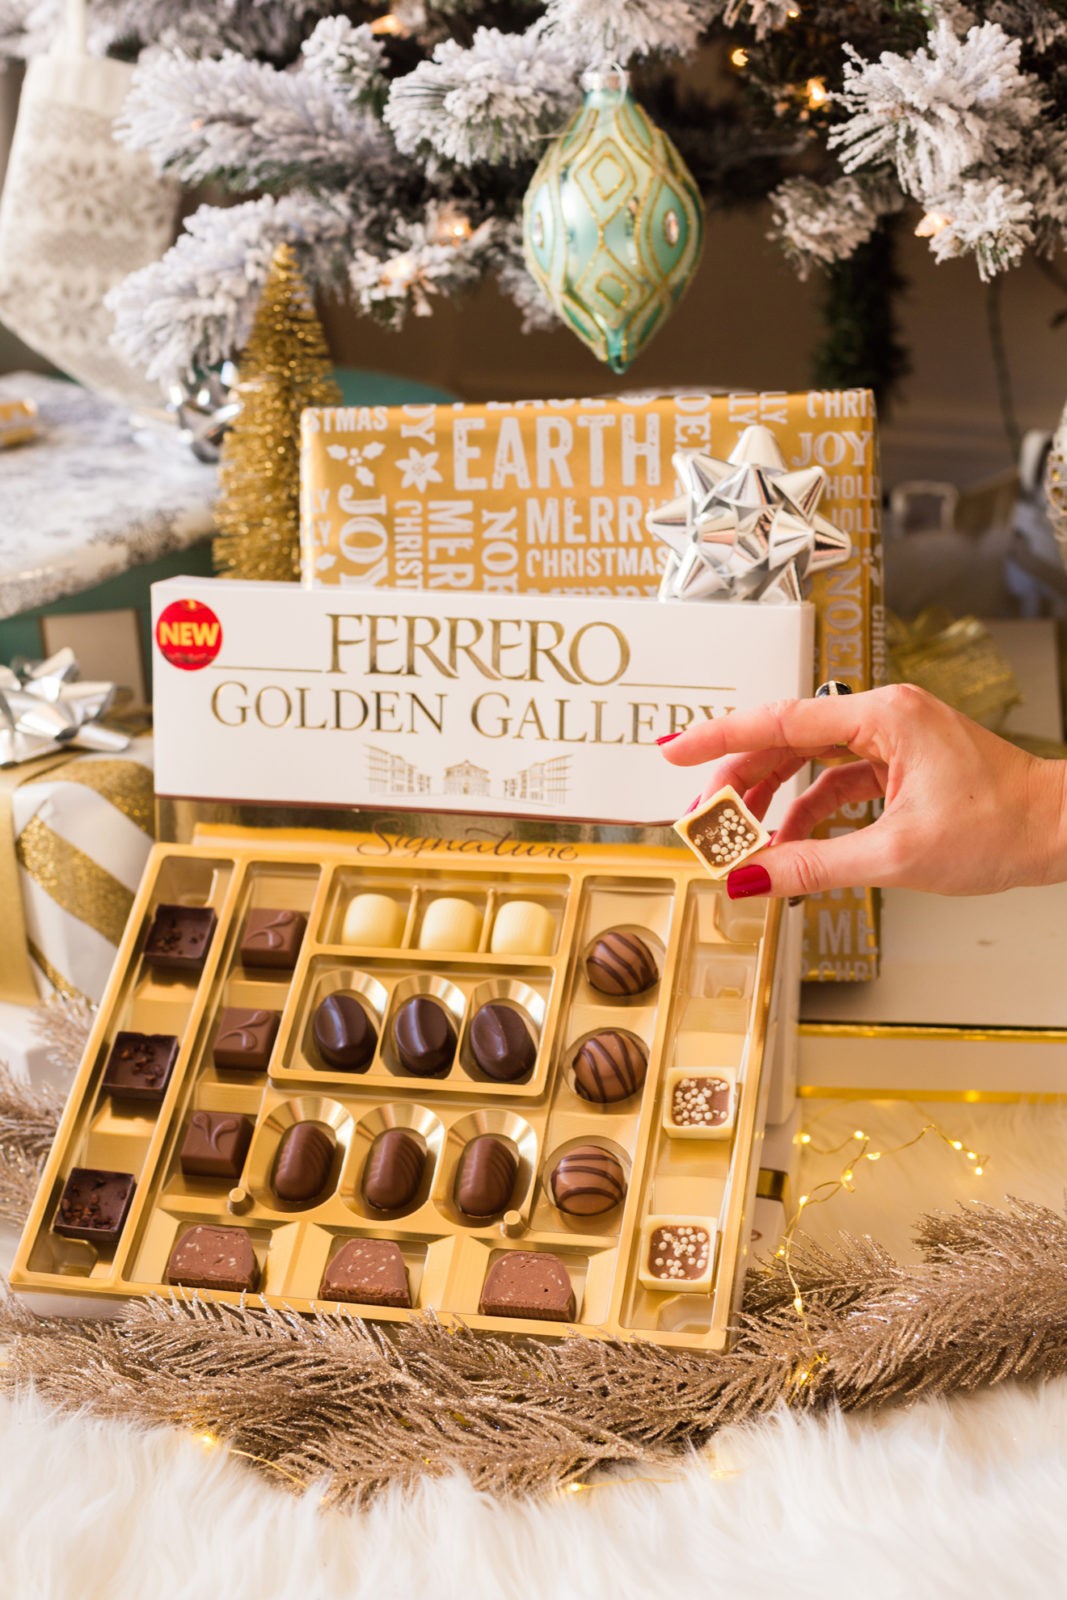 The Perfect Gift for Everyone, Ferrero Golden Gallery Signature Chocolates by Lifestyle Blogger Laura Lily | Ferrero Golden Gallery: The Perfect Holiday Gift for Everyone by popular Los Angeles life and style blogger, Laura Lily: image of wrapped presents and an open box of Ferrero Golden Gallery chocolates under a Christmas tree.